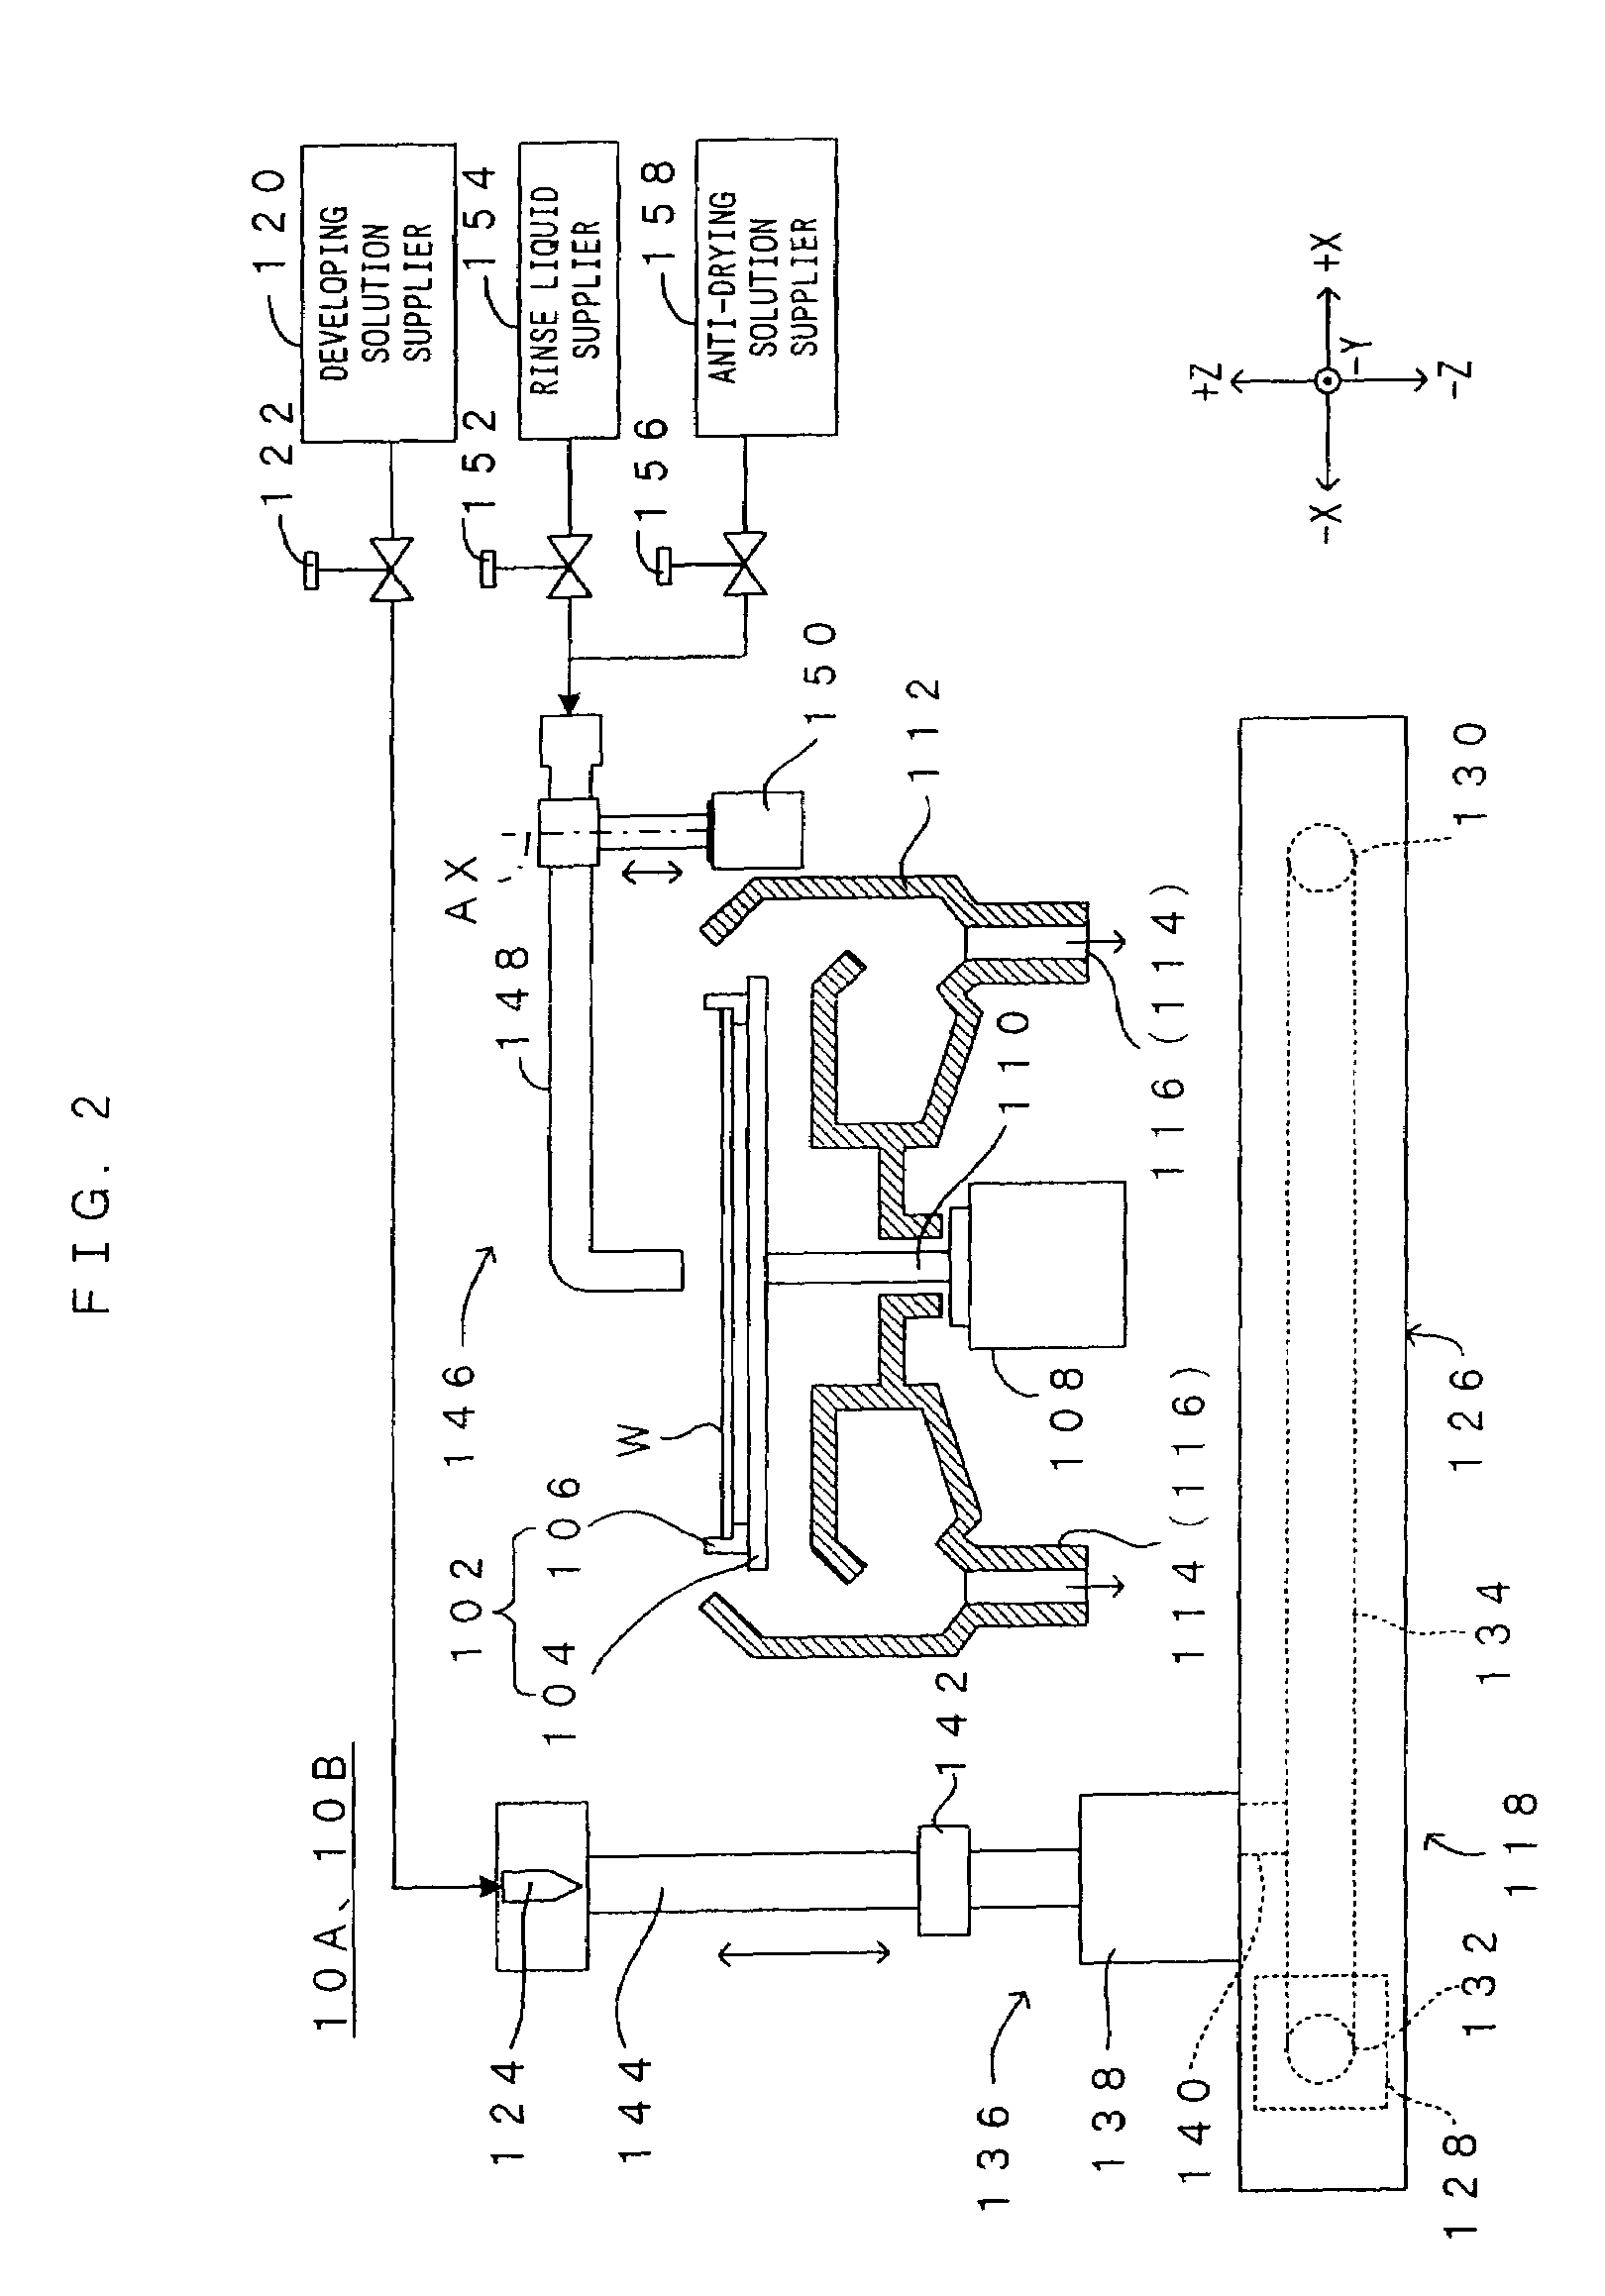 Substrate processing method, substrate processing apparatus and substrate processing system